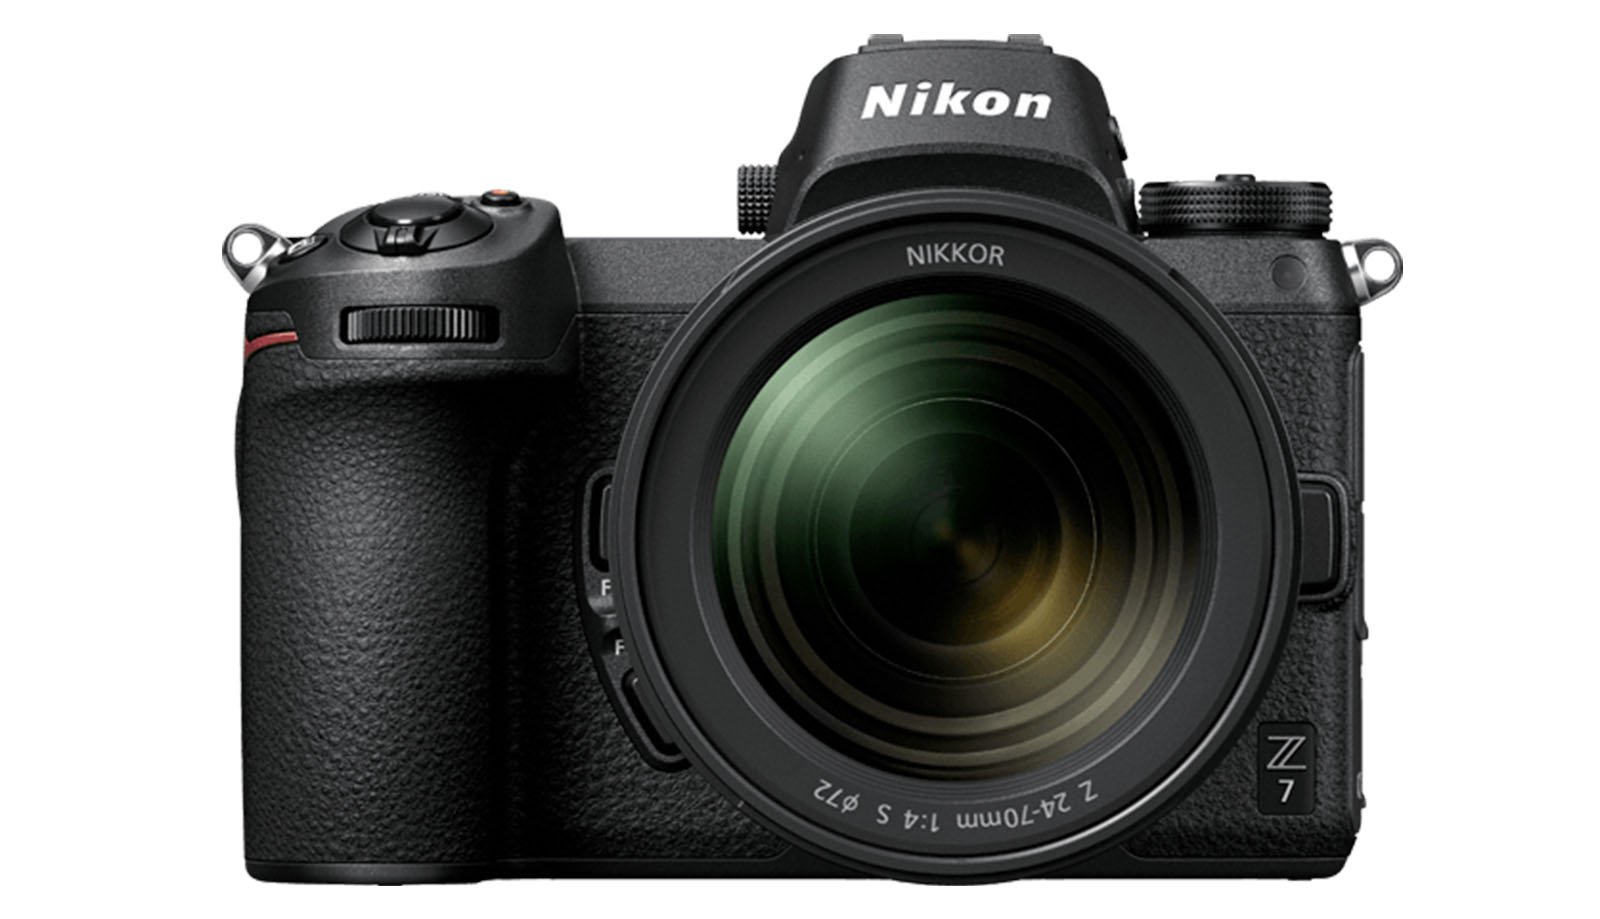 Front view of a Nikon Z7 mirrorless camera with a large zoom lens, displaying detailed texture on its black body and clearly visible brand and model markings.